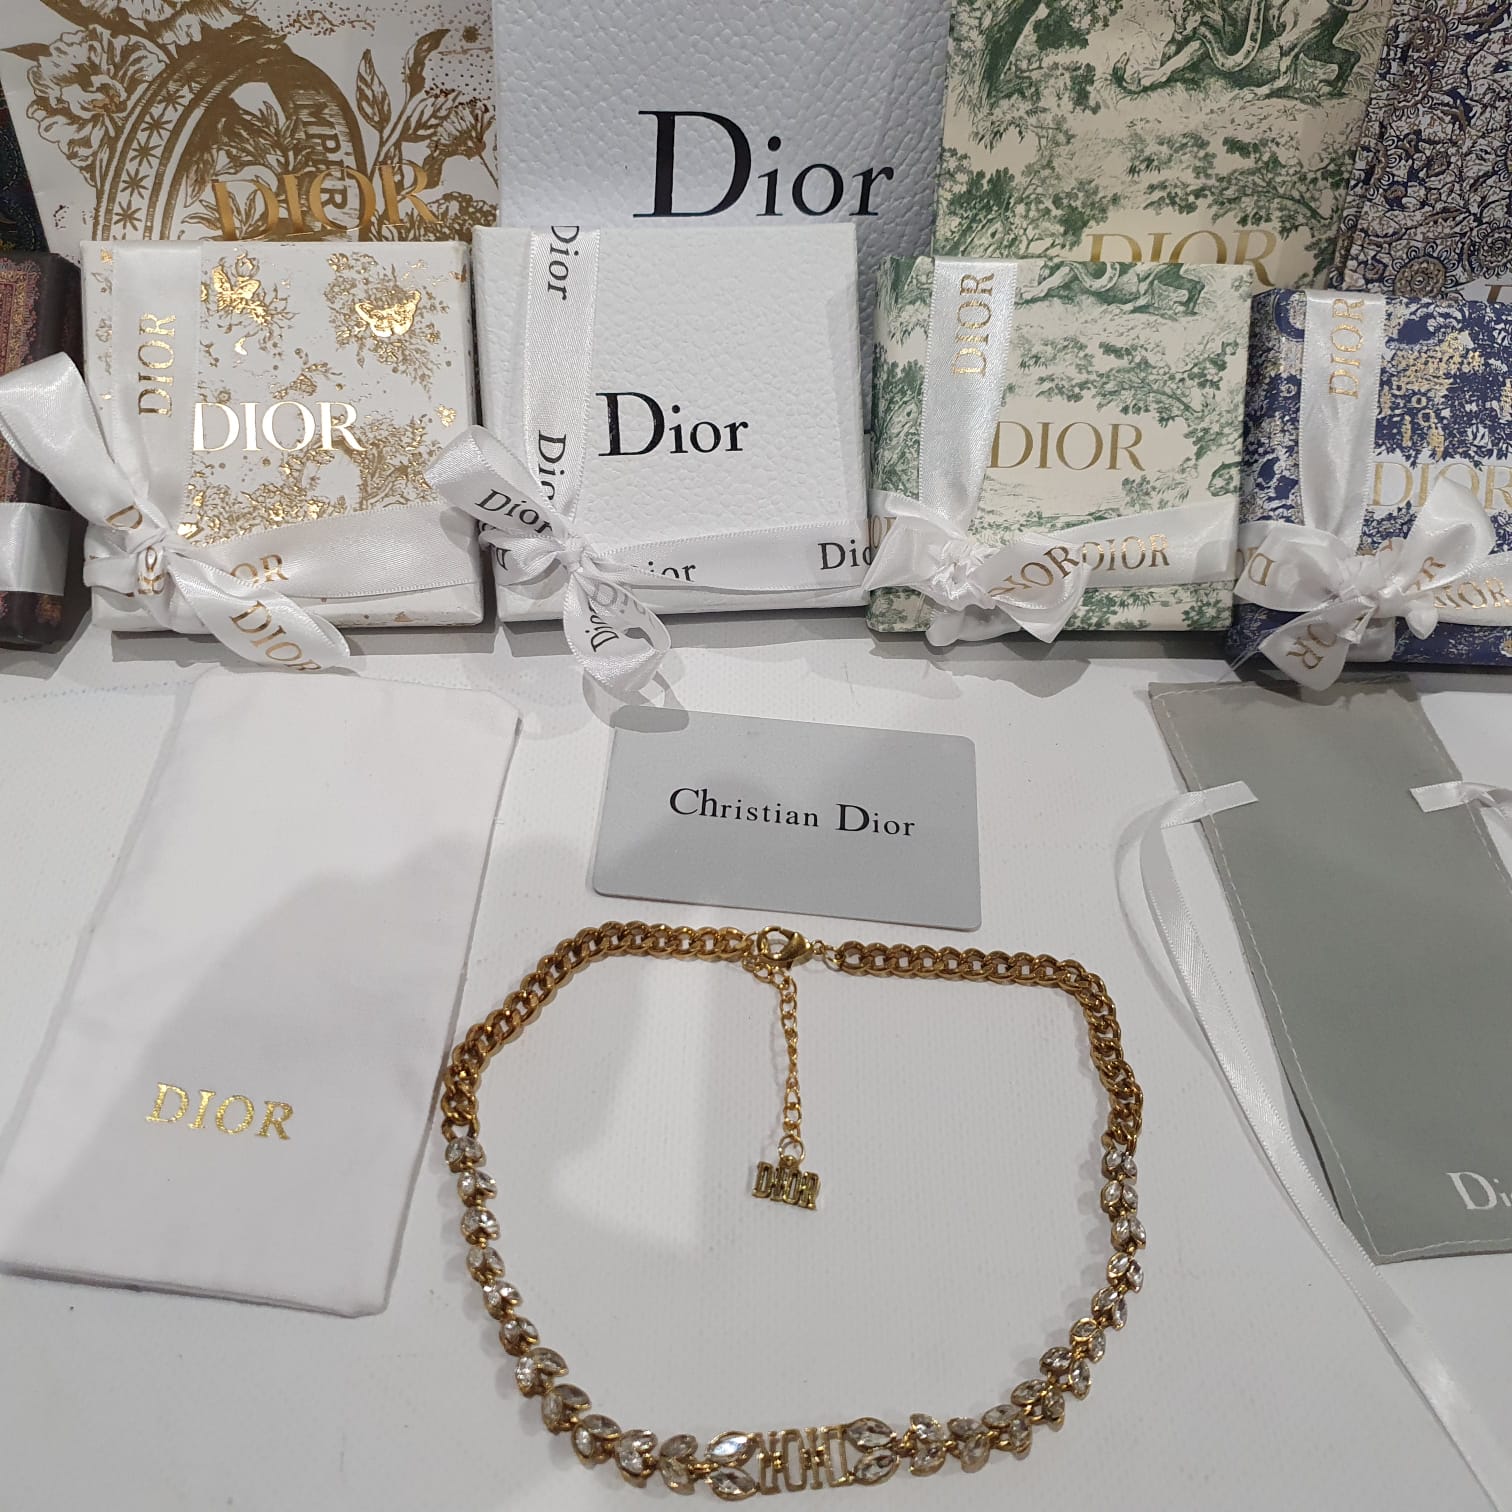 Christian Dior Necklace, bracelet and earrings